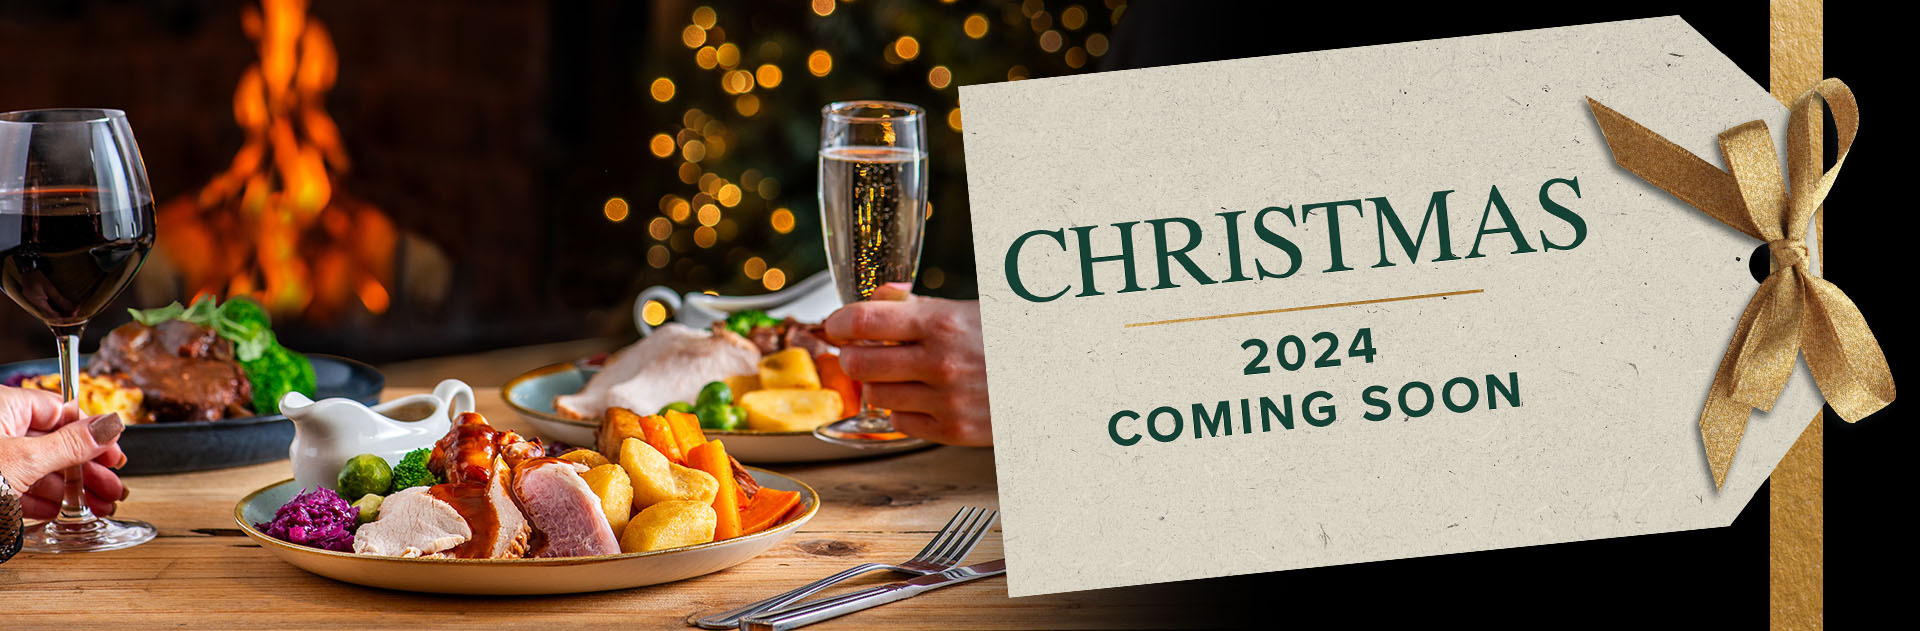 Christmas at The Eden Arms 